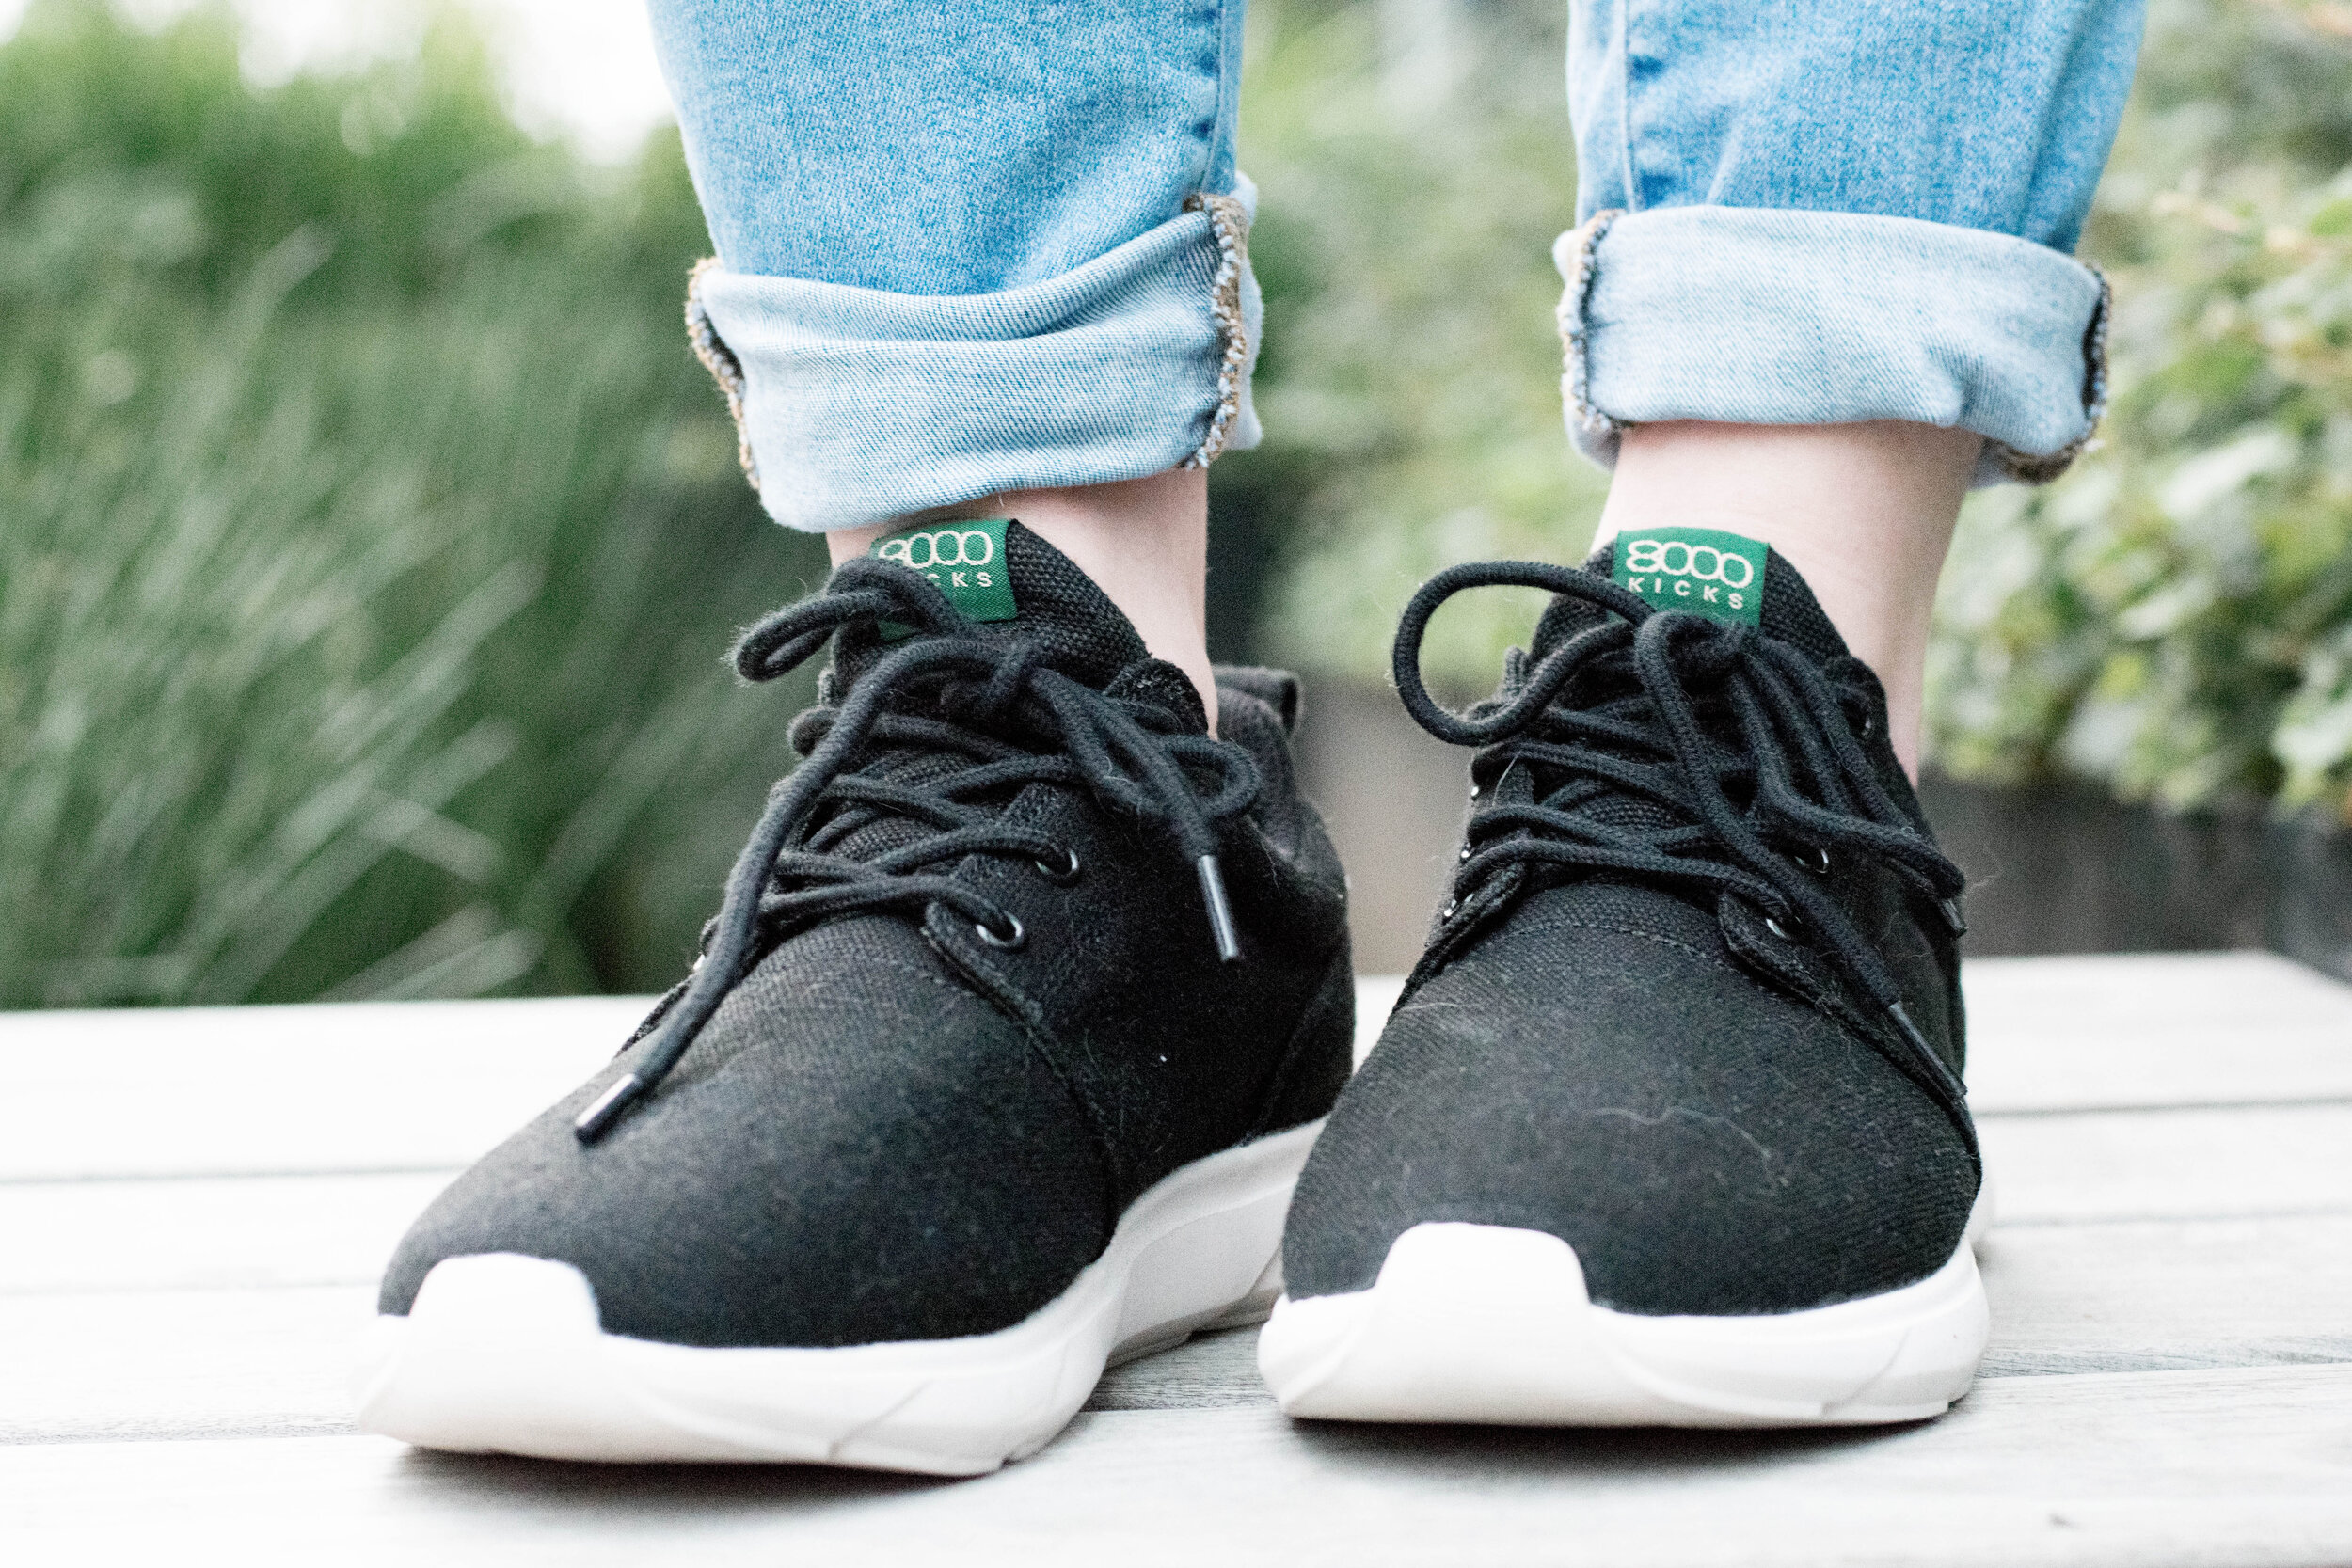 The Sustainable Shoe Made from Hemp: 8000Kicks Review — The Honest Consumer